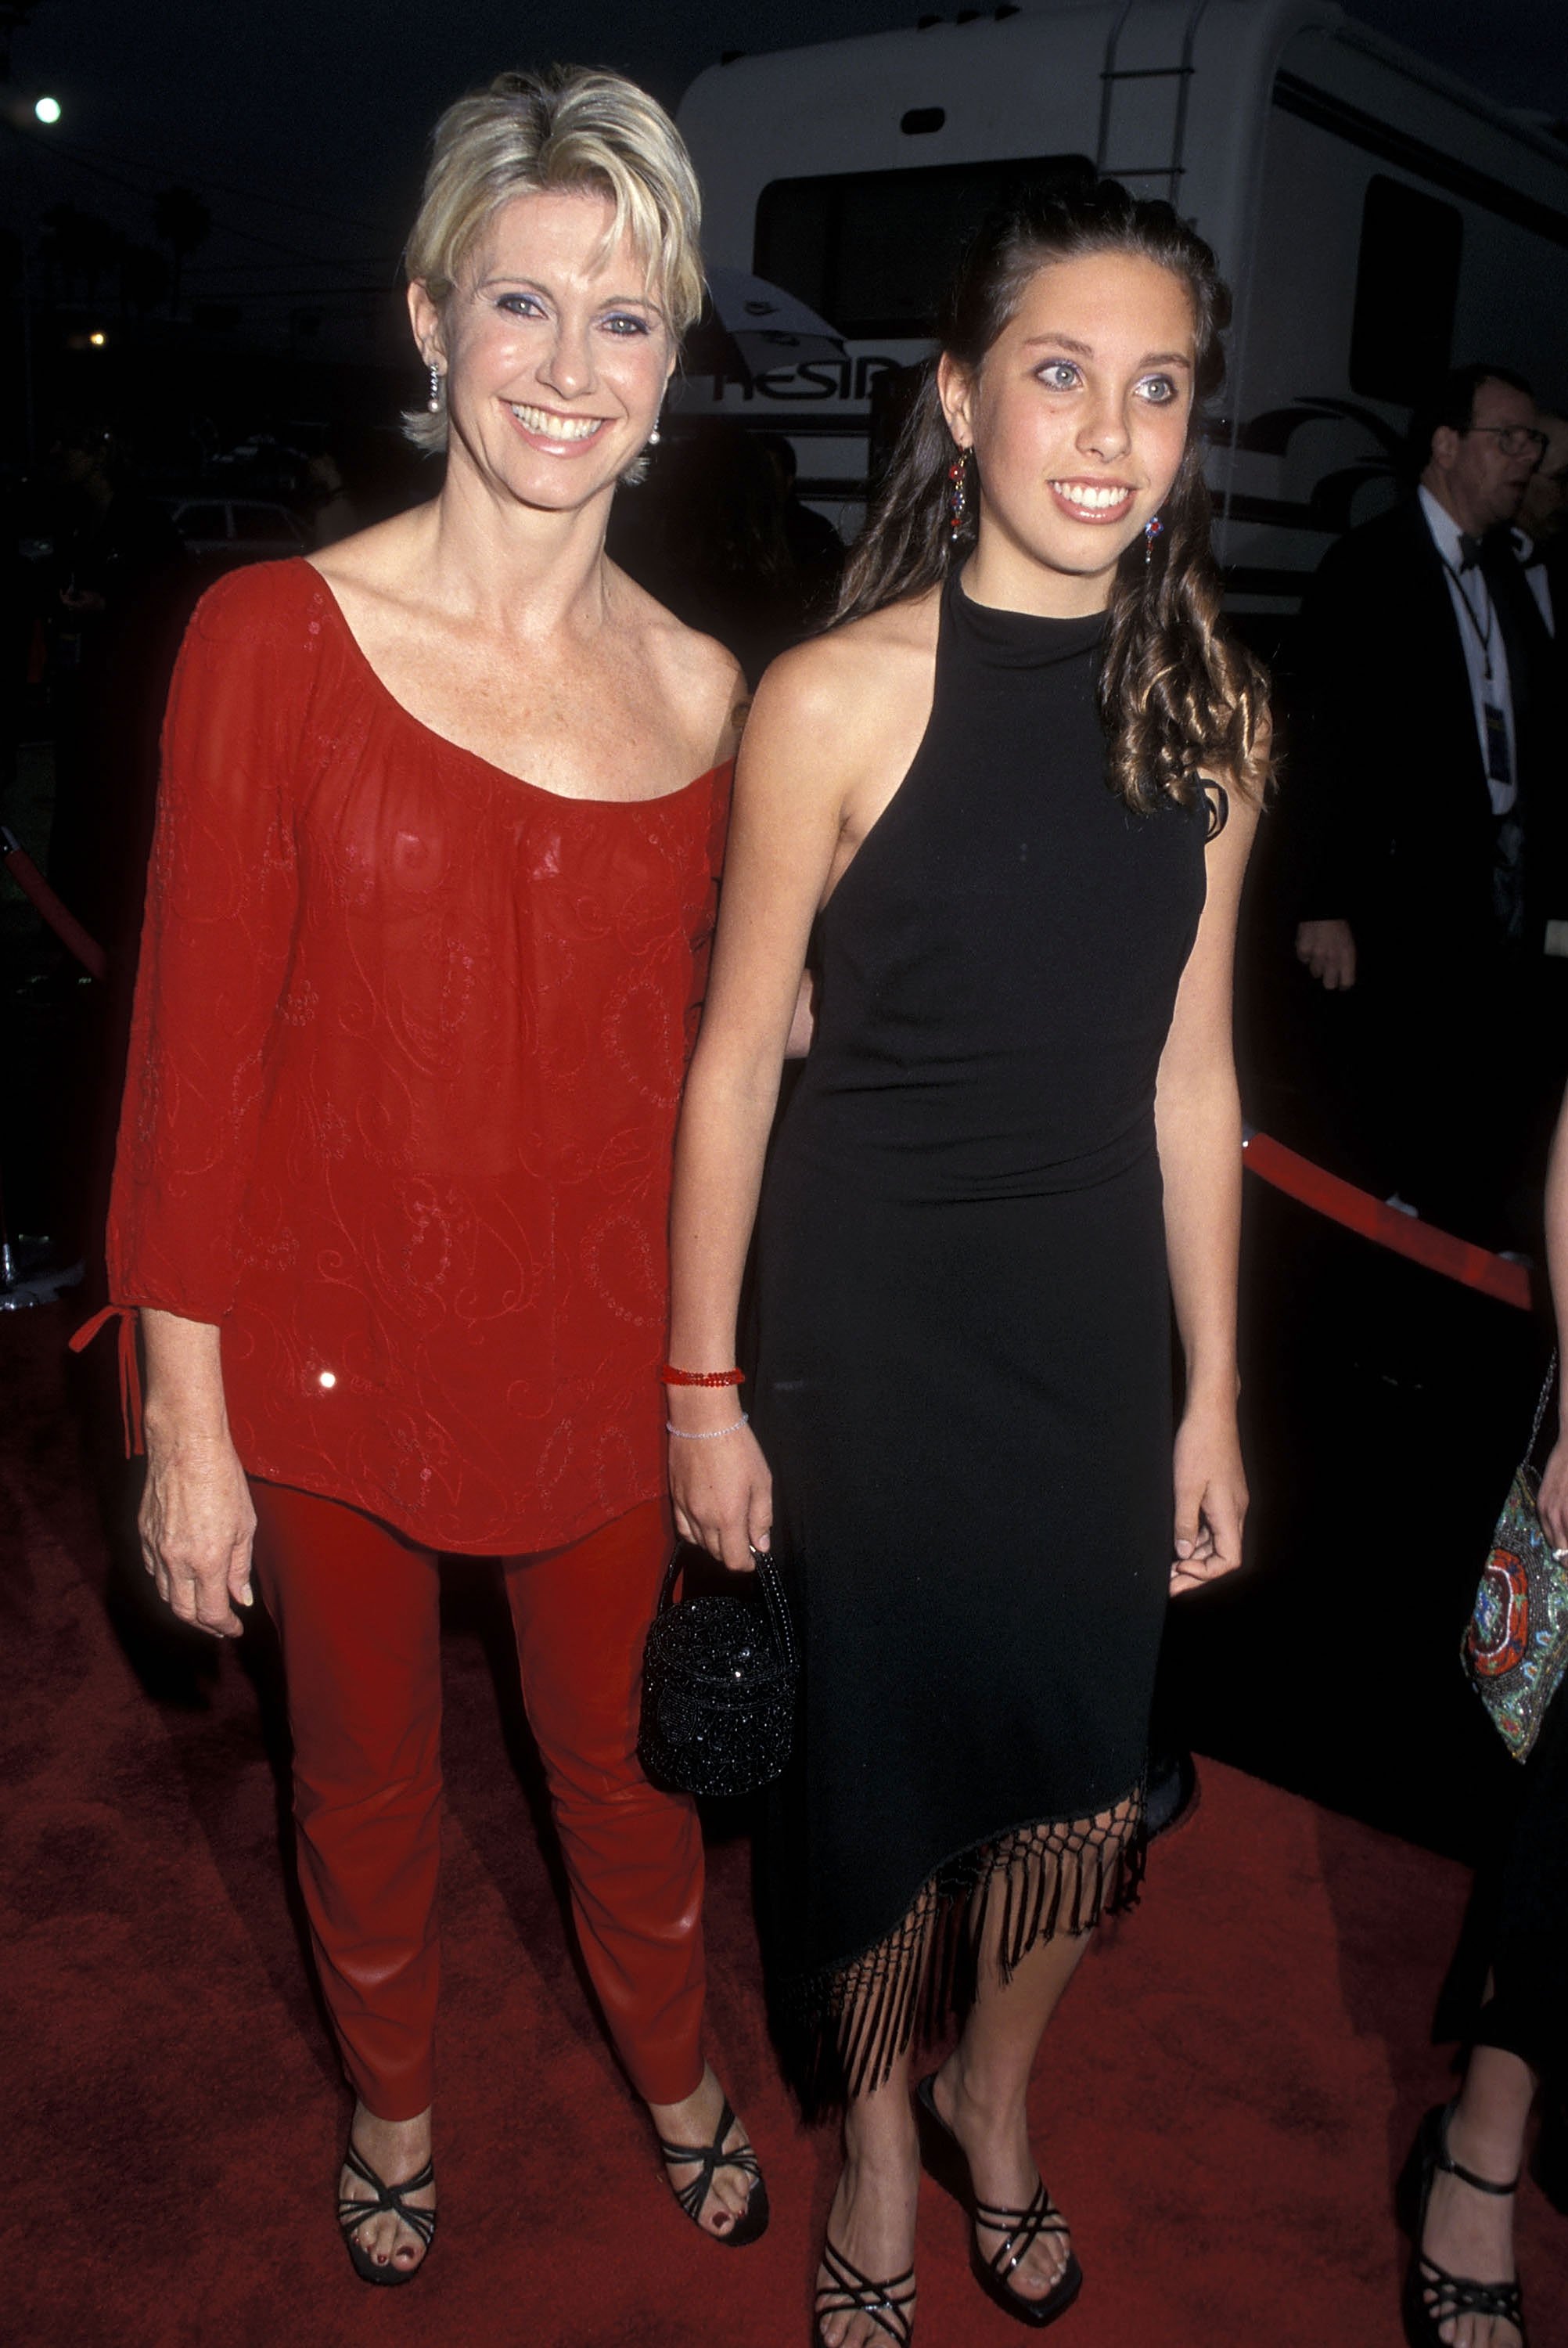 Singer Olivia Newton-John and daughter Chloe Lattanzi attend the 27th Annual American Music Awards on January 17, 2000 at Shrine Auditorium in Los Angeles, California. | Source: Getty Images